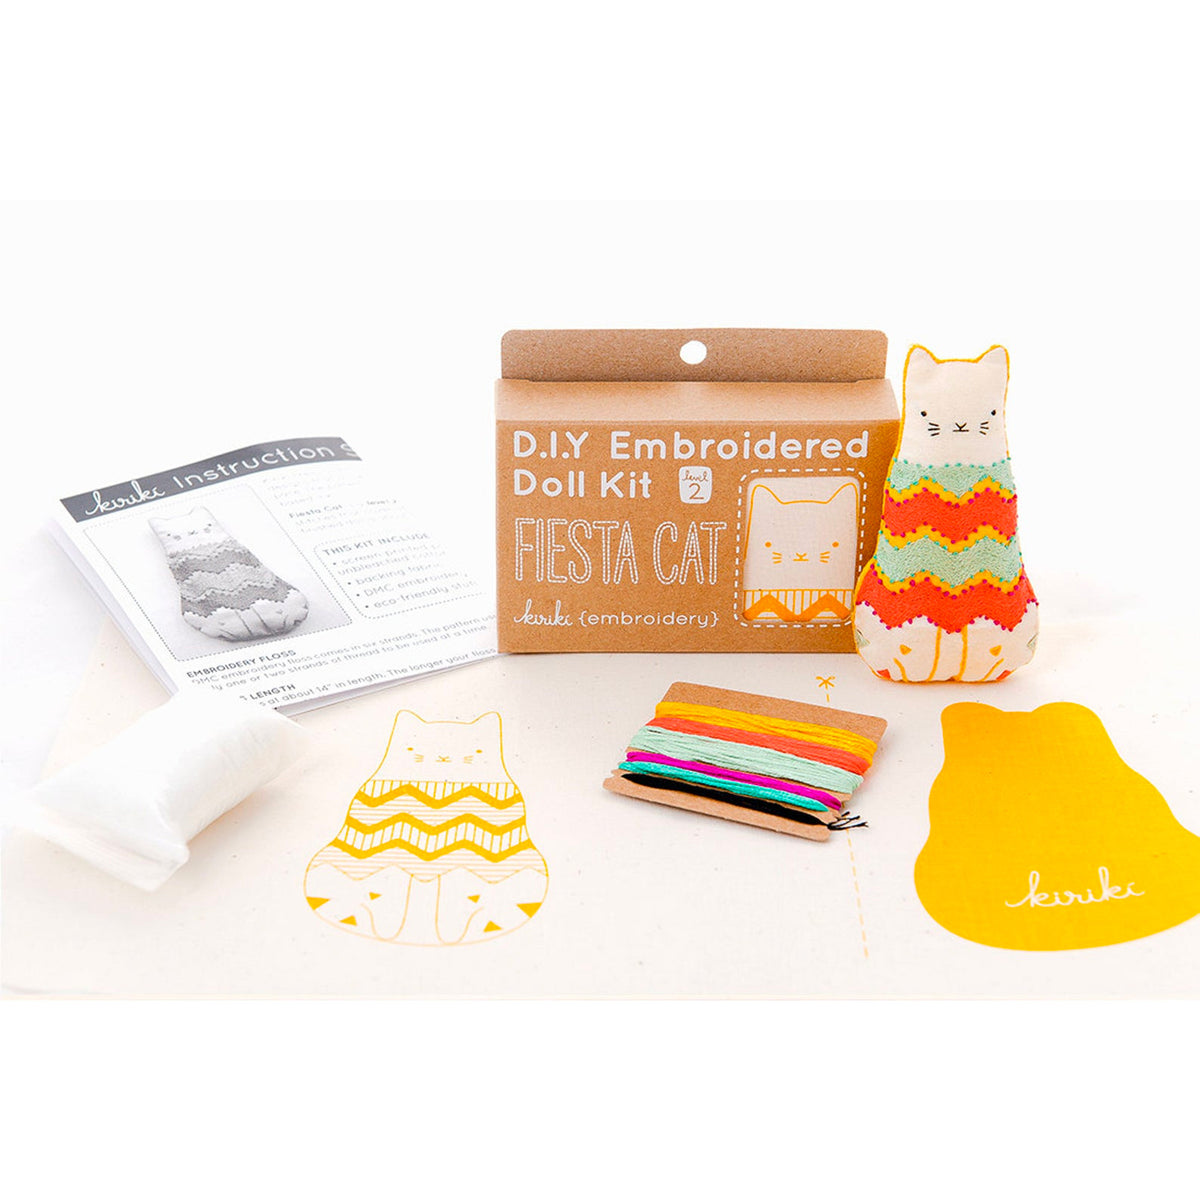 Hand Embroidered Plushie Doll Kit - Fiesta Cat